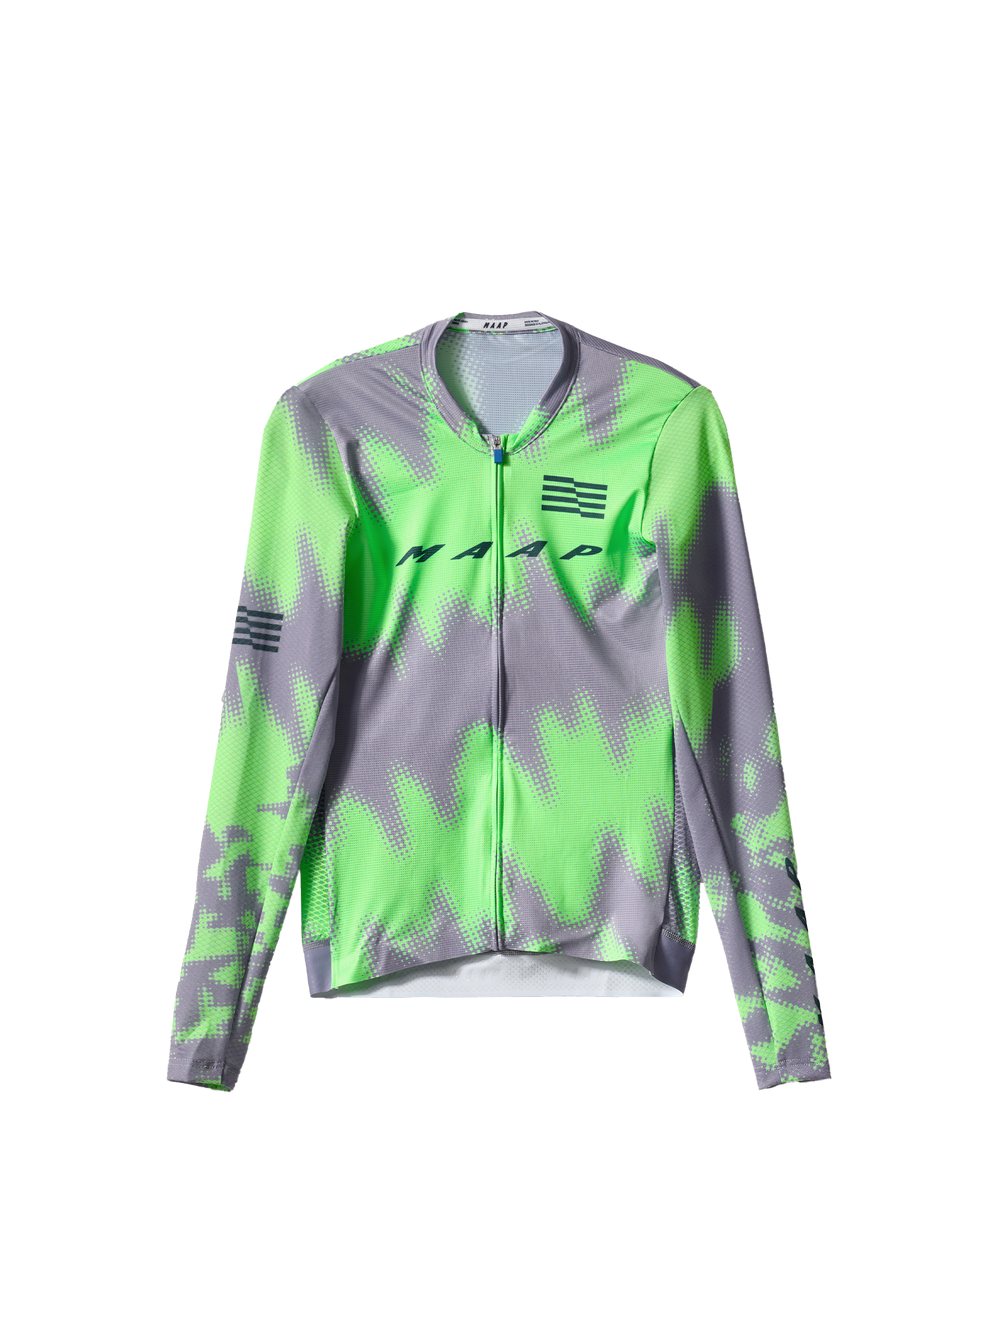 Product Image for LPW Pro Air LS Jersey 2.0